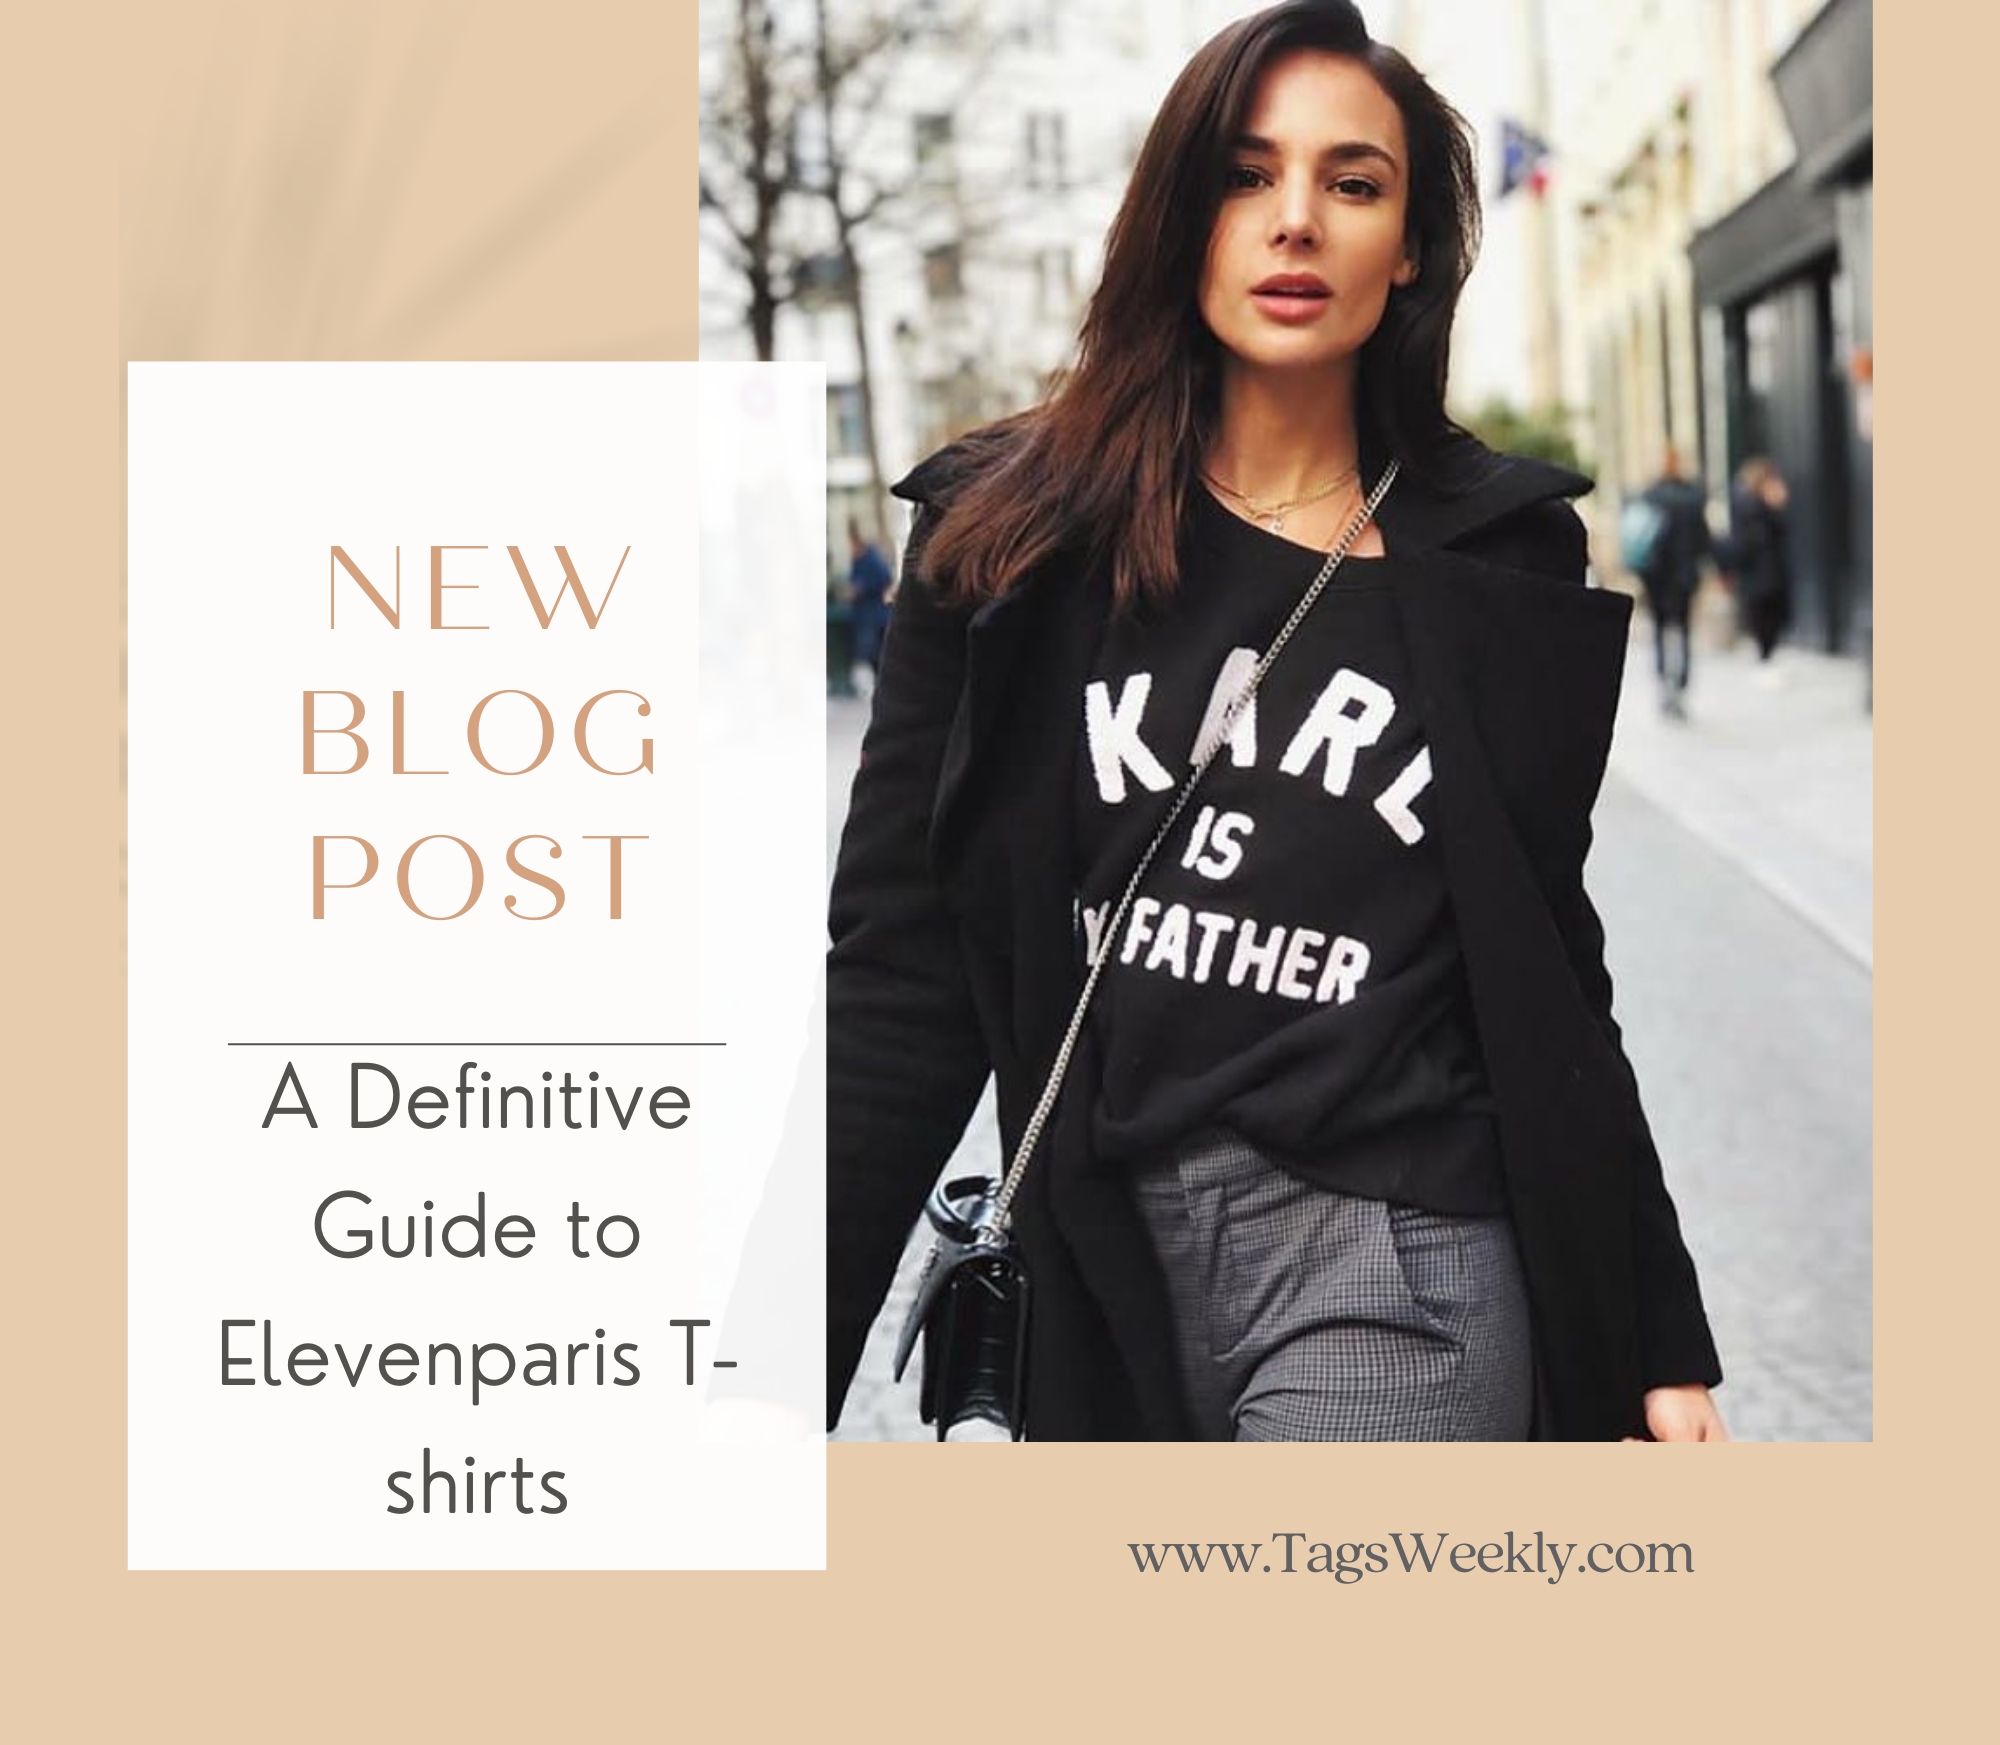 A Definitive Guide to Elevenparis T-shirts - Tagsweekly